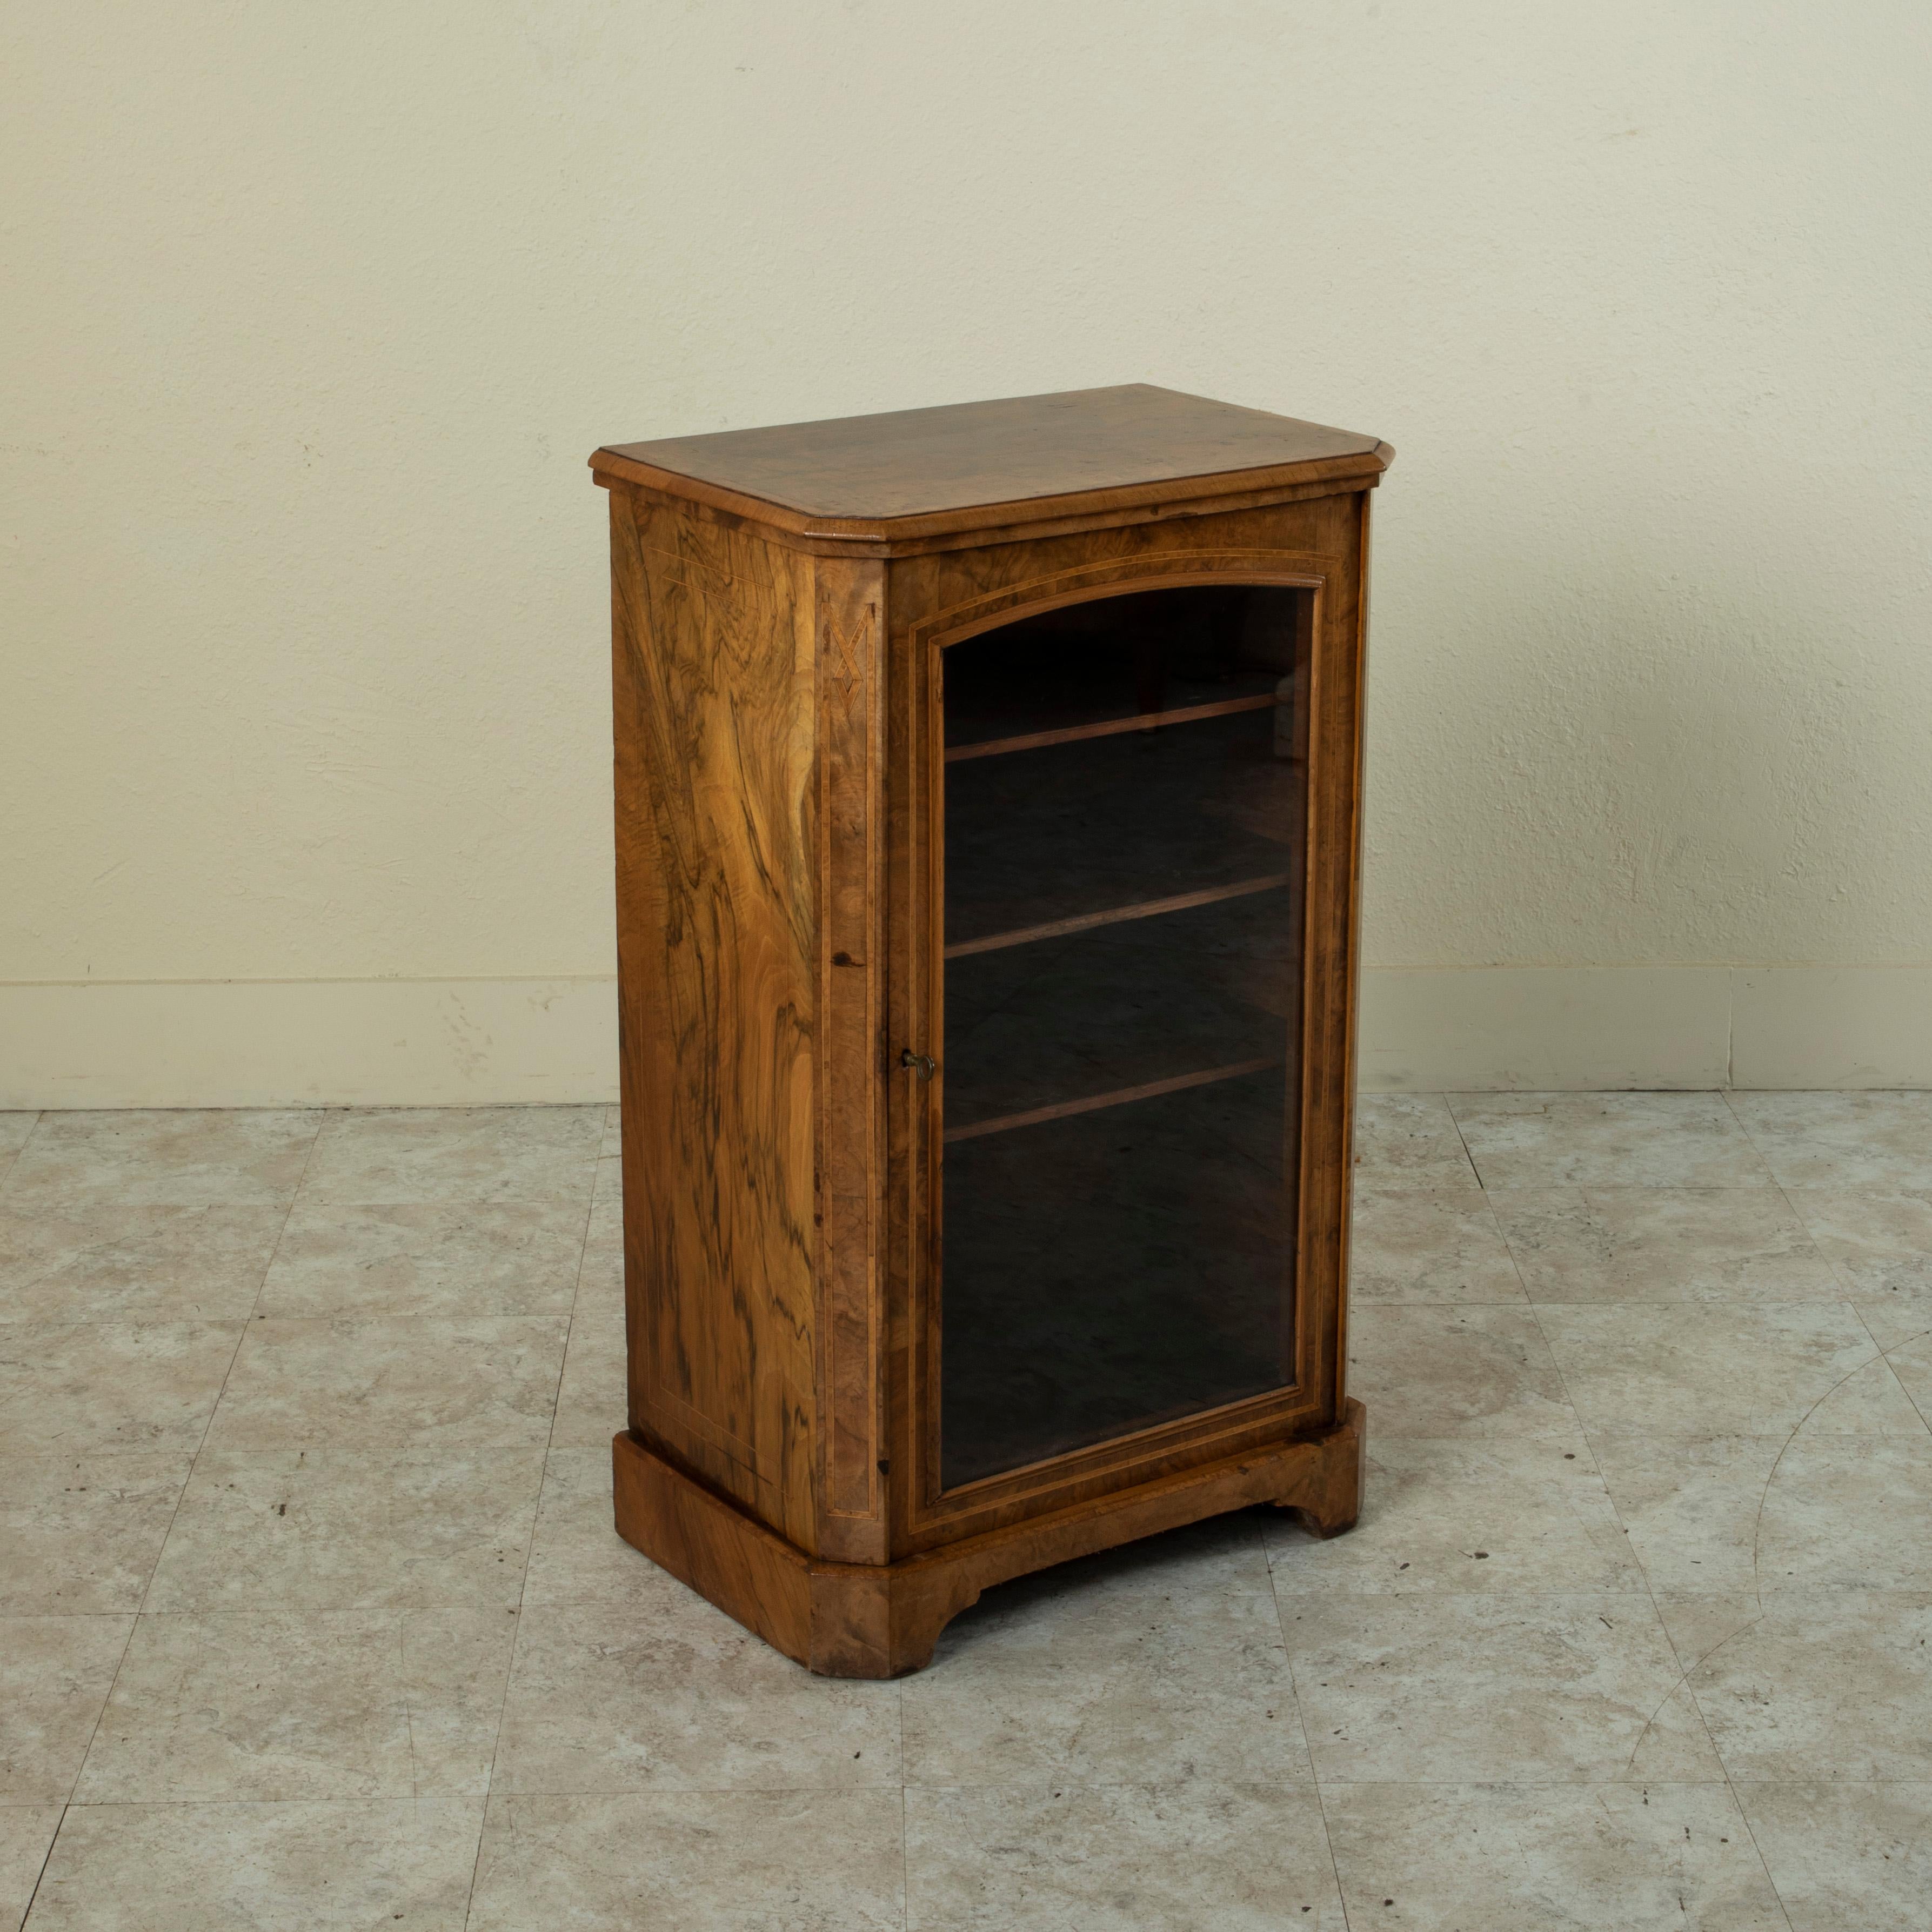 Standing at 36.5 inches in height, this small scale French burl walnut vitrine from the turn of the twentieth century features inset borders made of fine lines of inlaid lemonwood and elm. Its single glass door opens to reveal an interior with three